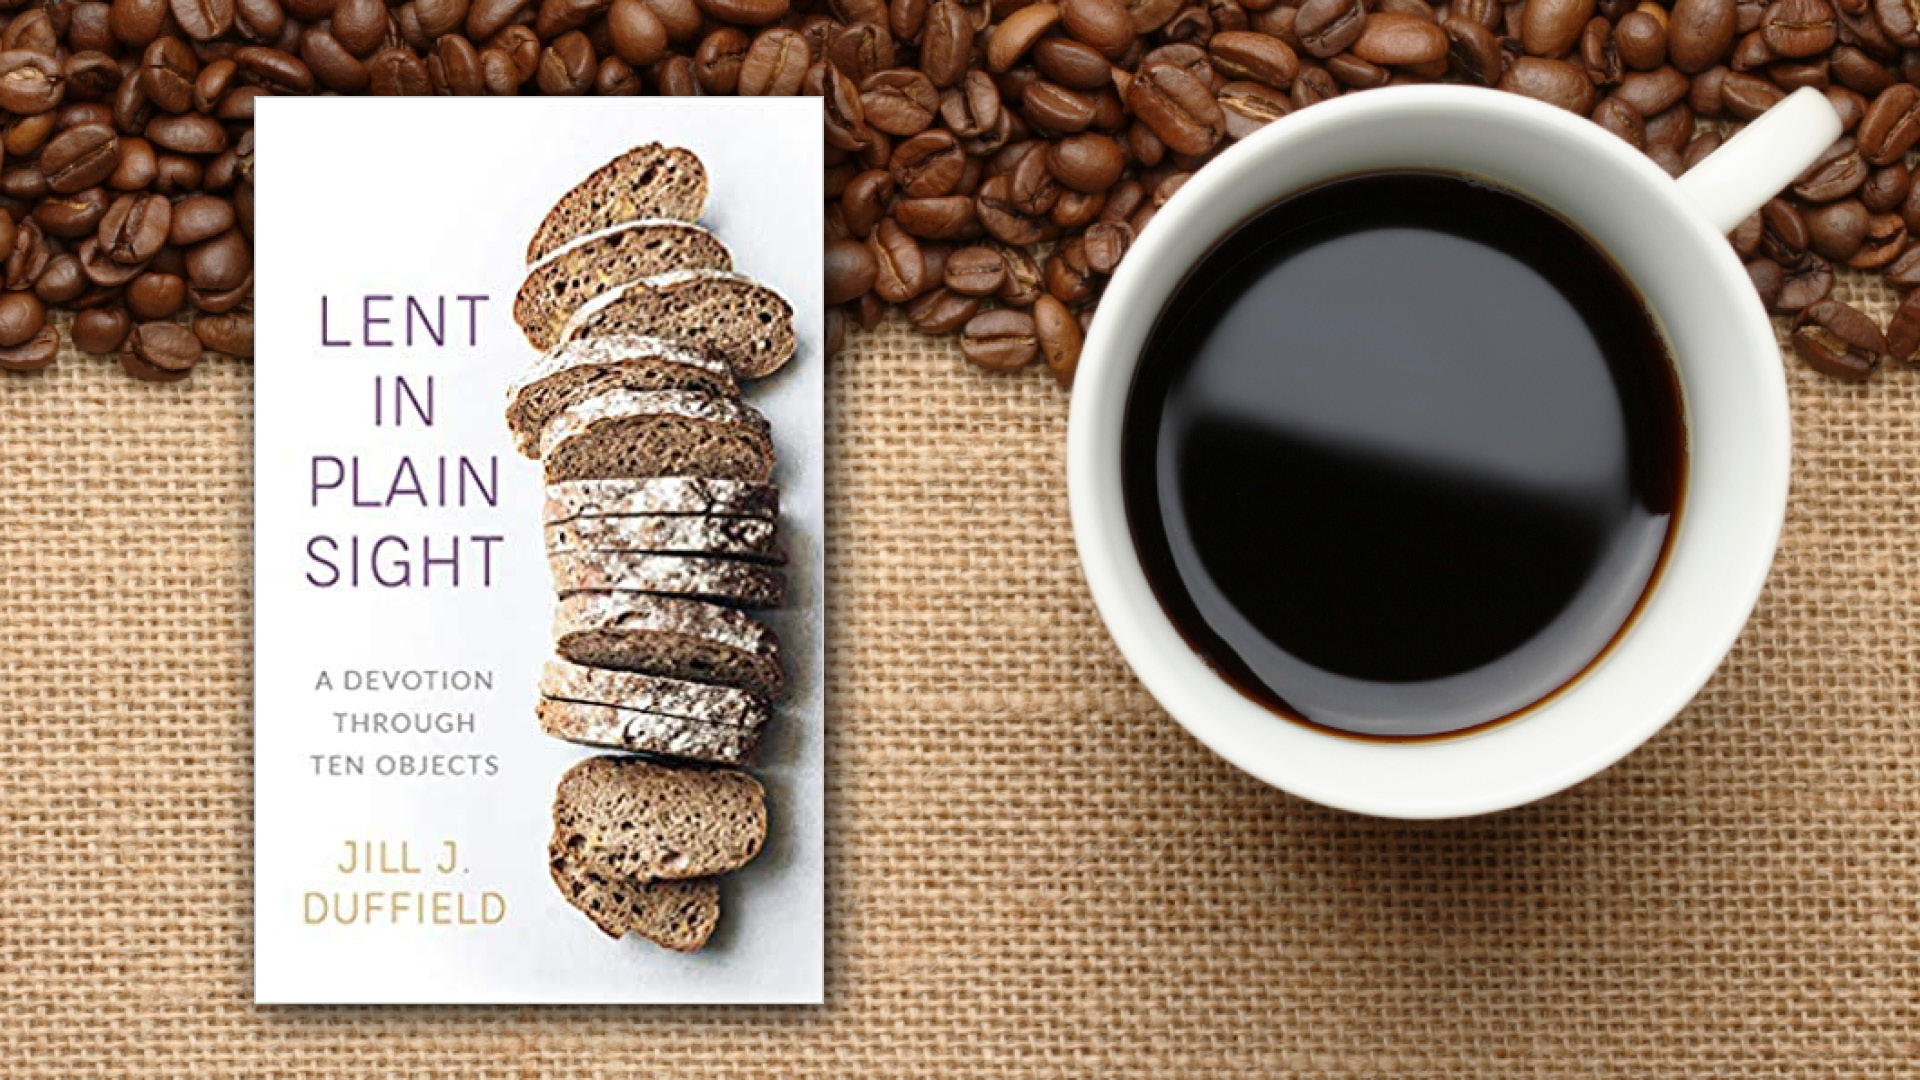 Theology, Thoughts & Coffee
Sundays, 8 a.m., Zoom
Book Study: Lent in Plain Sight by Jill Duffield
